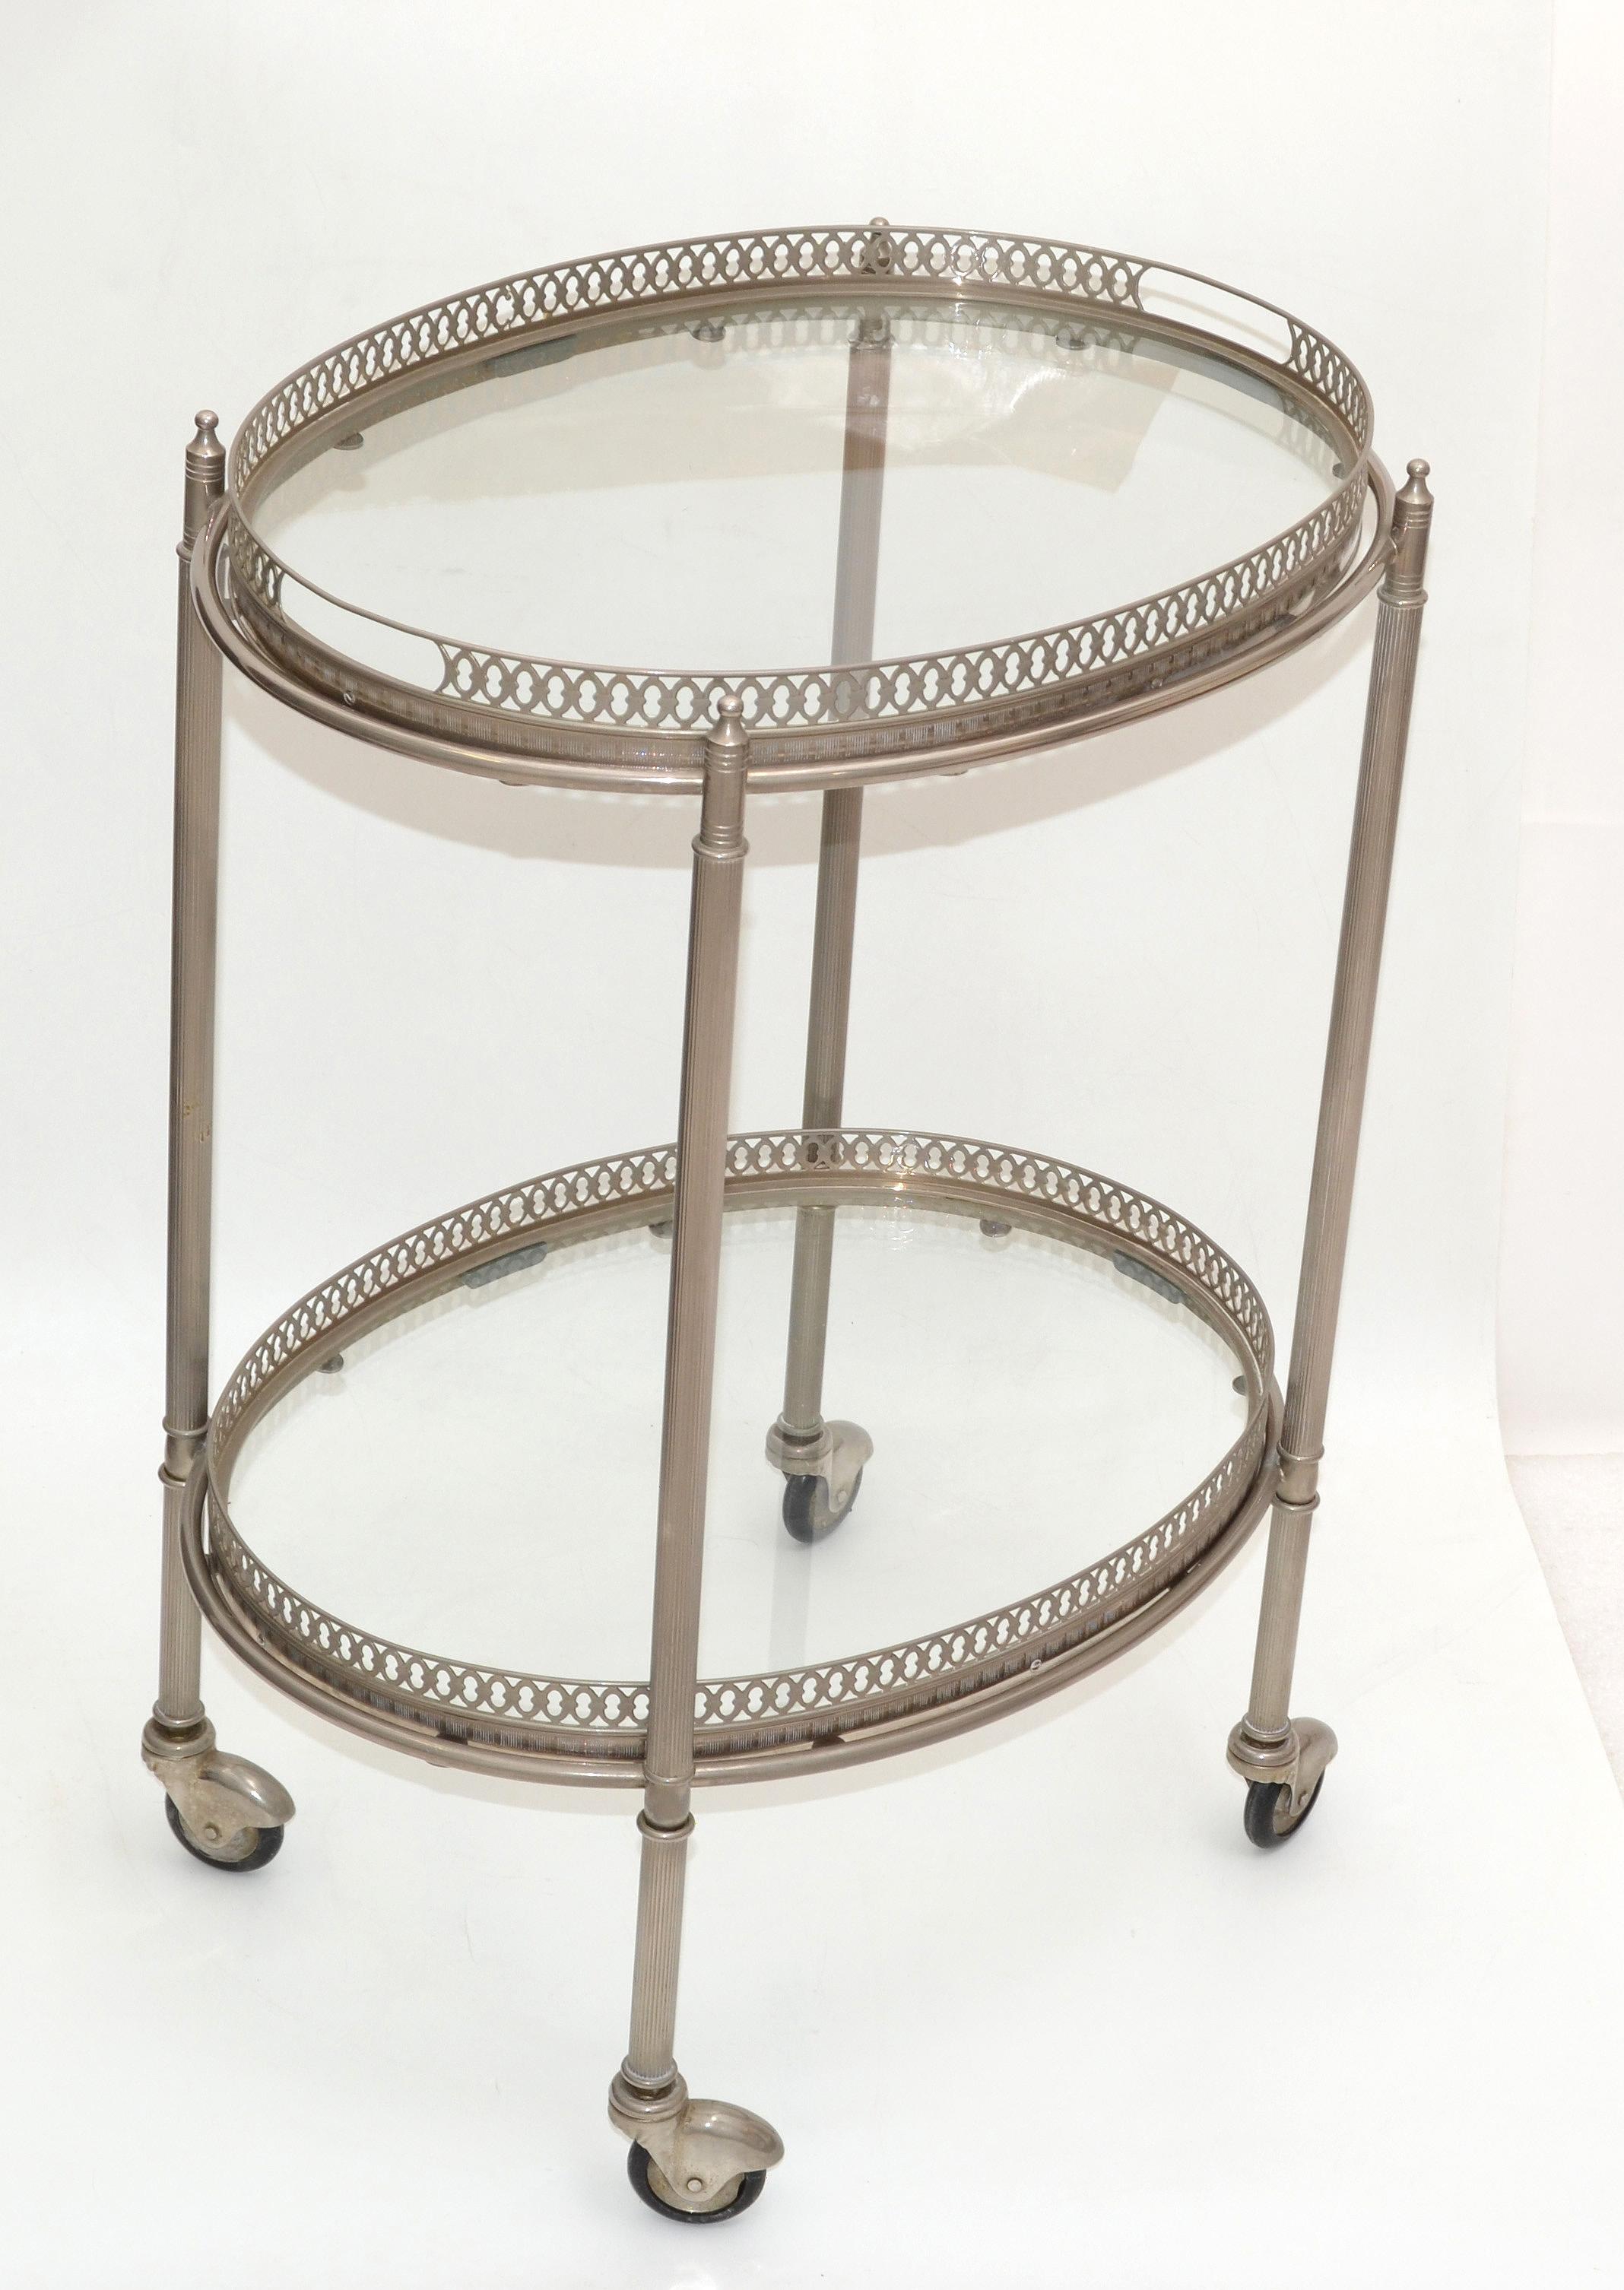 Silvered Bronze Bar Cart by Maison Lancel Paris France Mid-Century Modern 1955 In Good Condition For Sale In Miami, FL